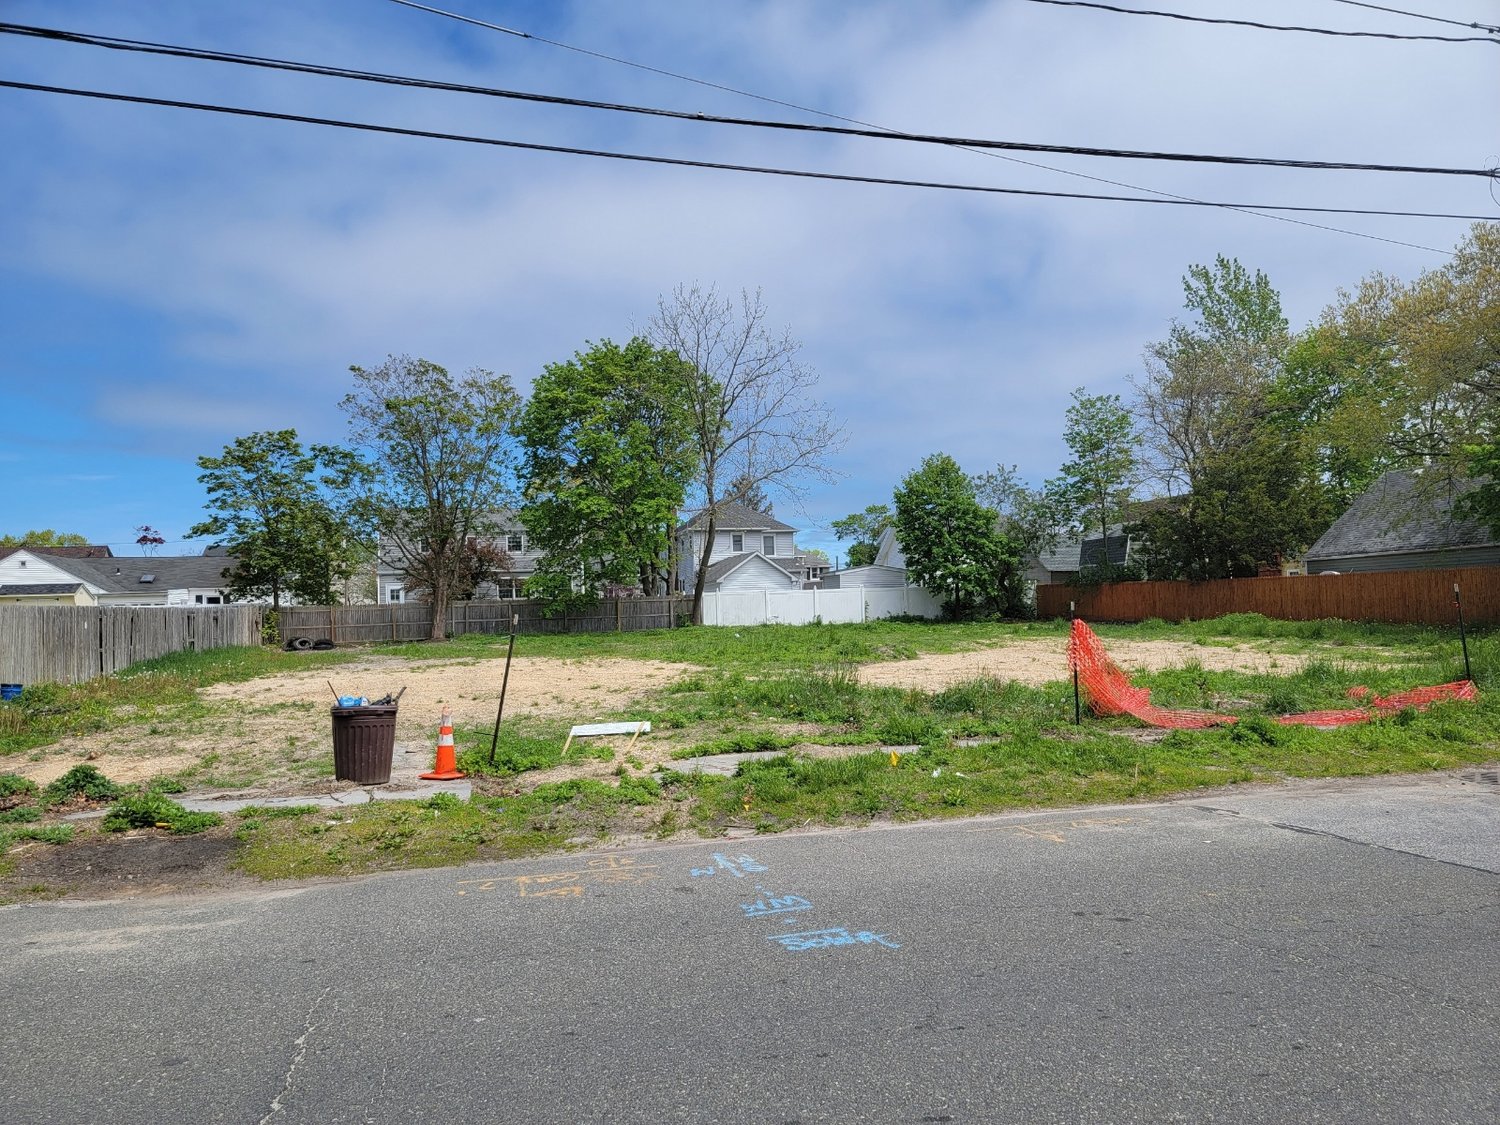 A Mt. Sinai-based developer is seeking permission to erect two new two-story, two-family homes with two attached garages each, in Patchogue at 243 and 247 West Avenue.